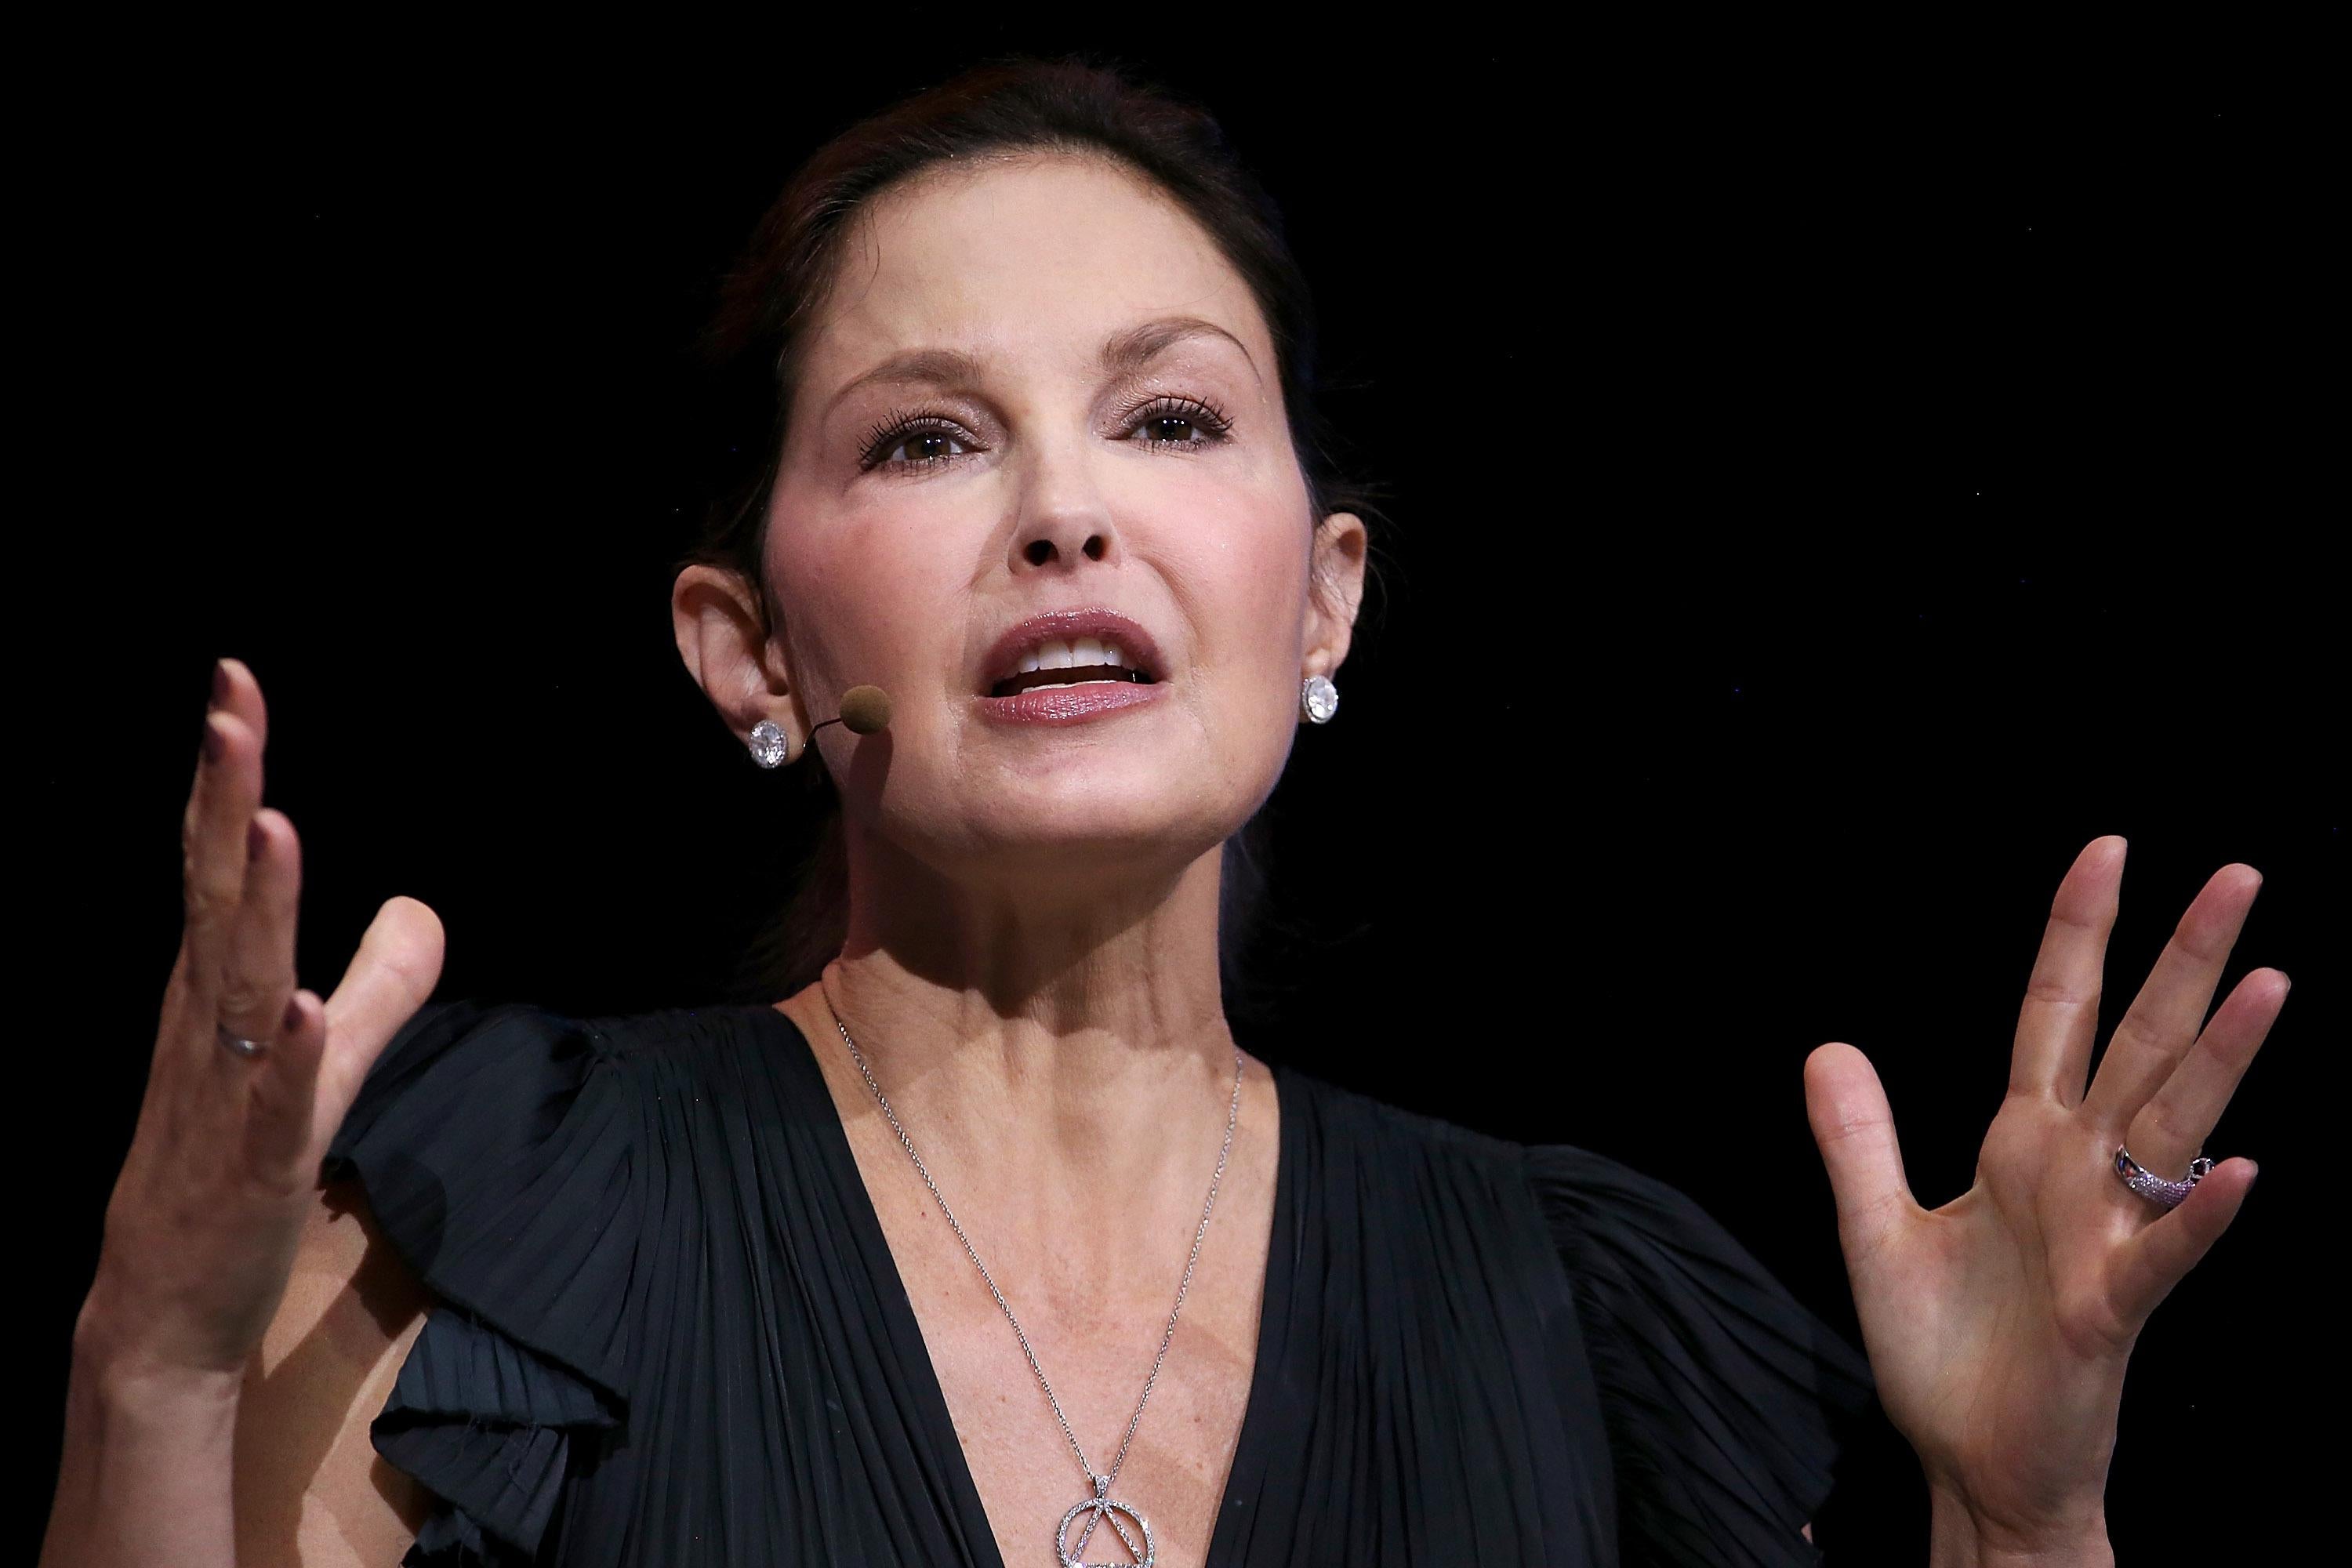 SAN FRANCISCO, CA - APRIL 24:  Actress and activist Ashley Judd speaks during the 29th annual Conference of the Professional Businesswomen of California (PBWC) on April 24, 2018 in San Francisco, California. The PBWC is a day of keynote speakers and seminars by top female leaders and panels of industry experts.  (Photo by Justin Sullivan/Getty Images)